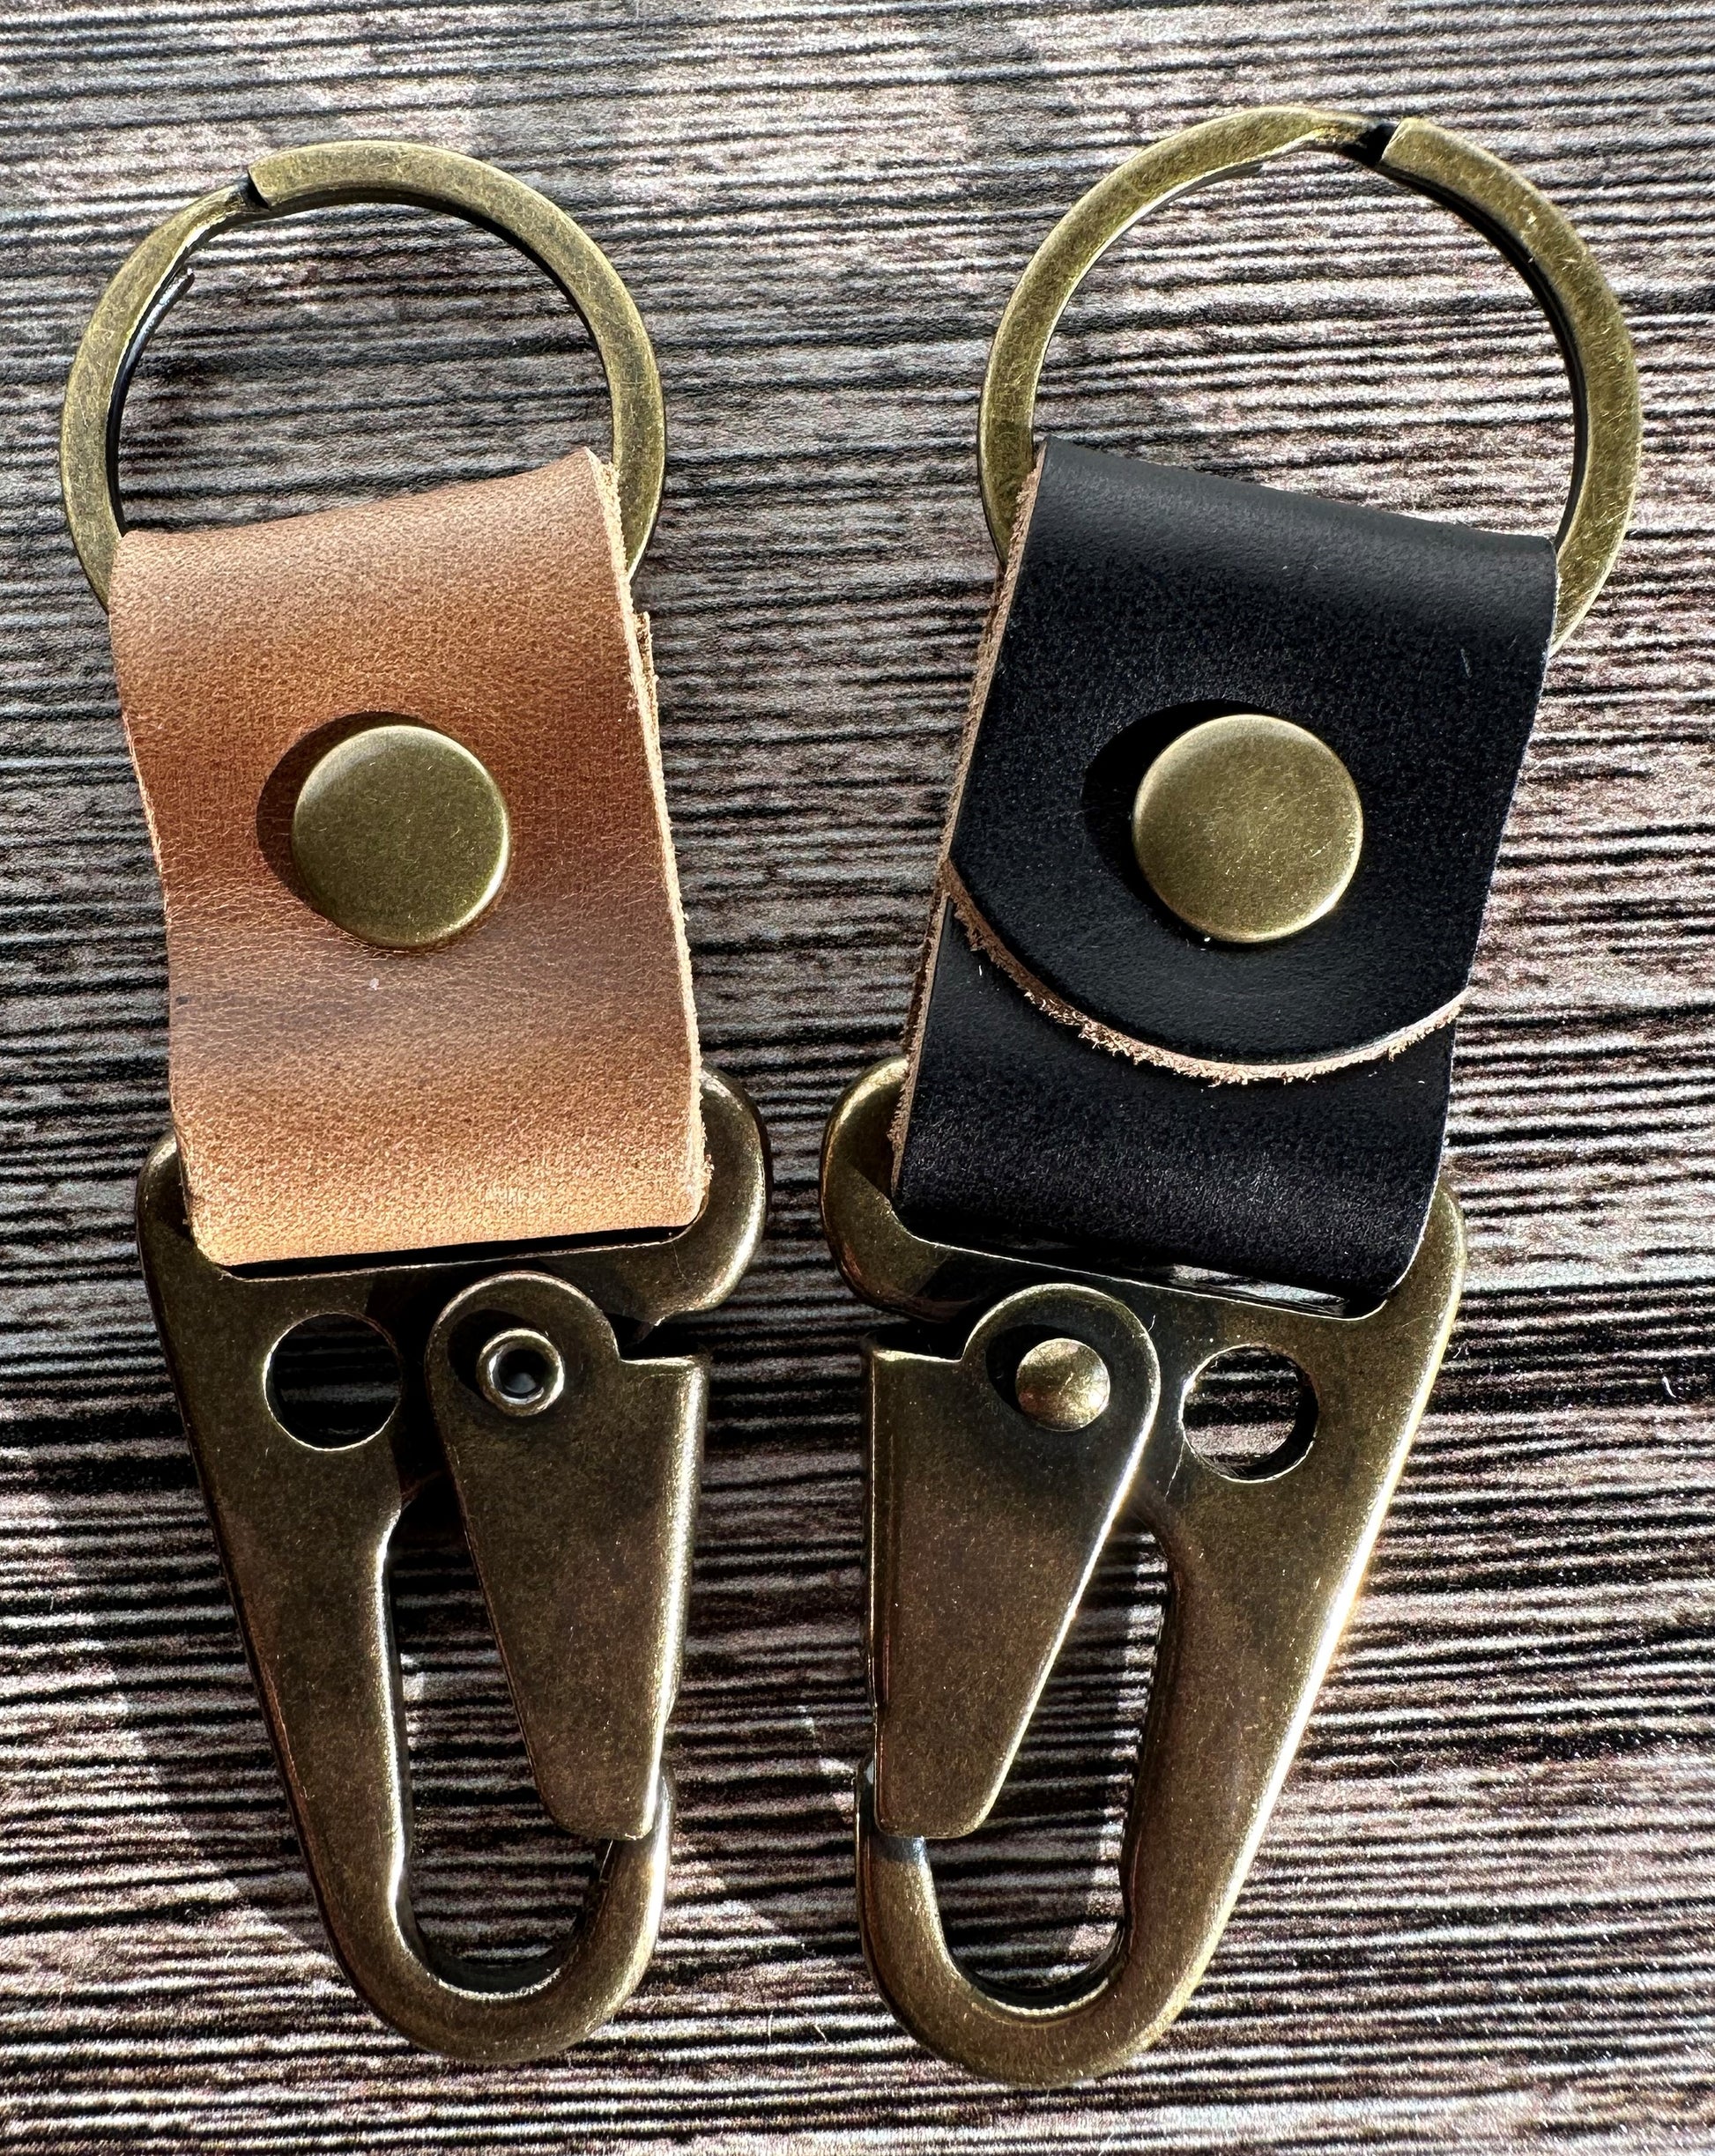 Leather and Brass Lever Keychain SquiresCanvasCreations